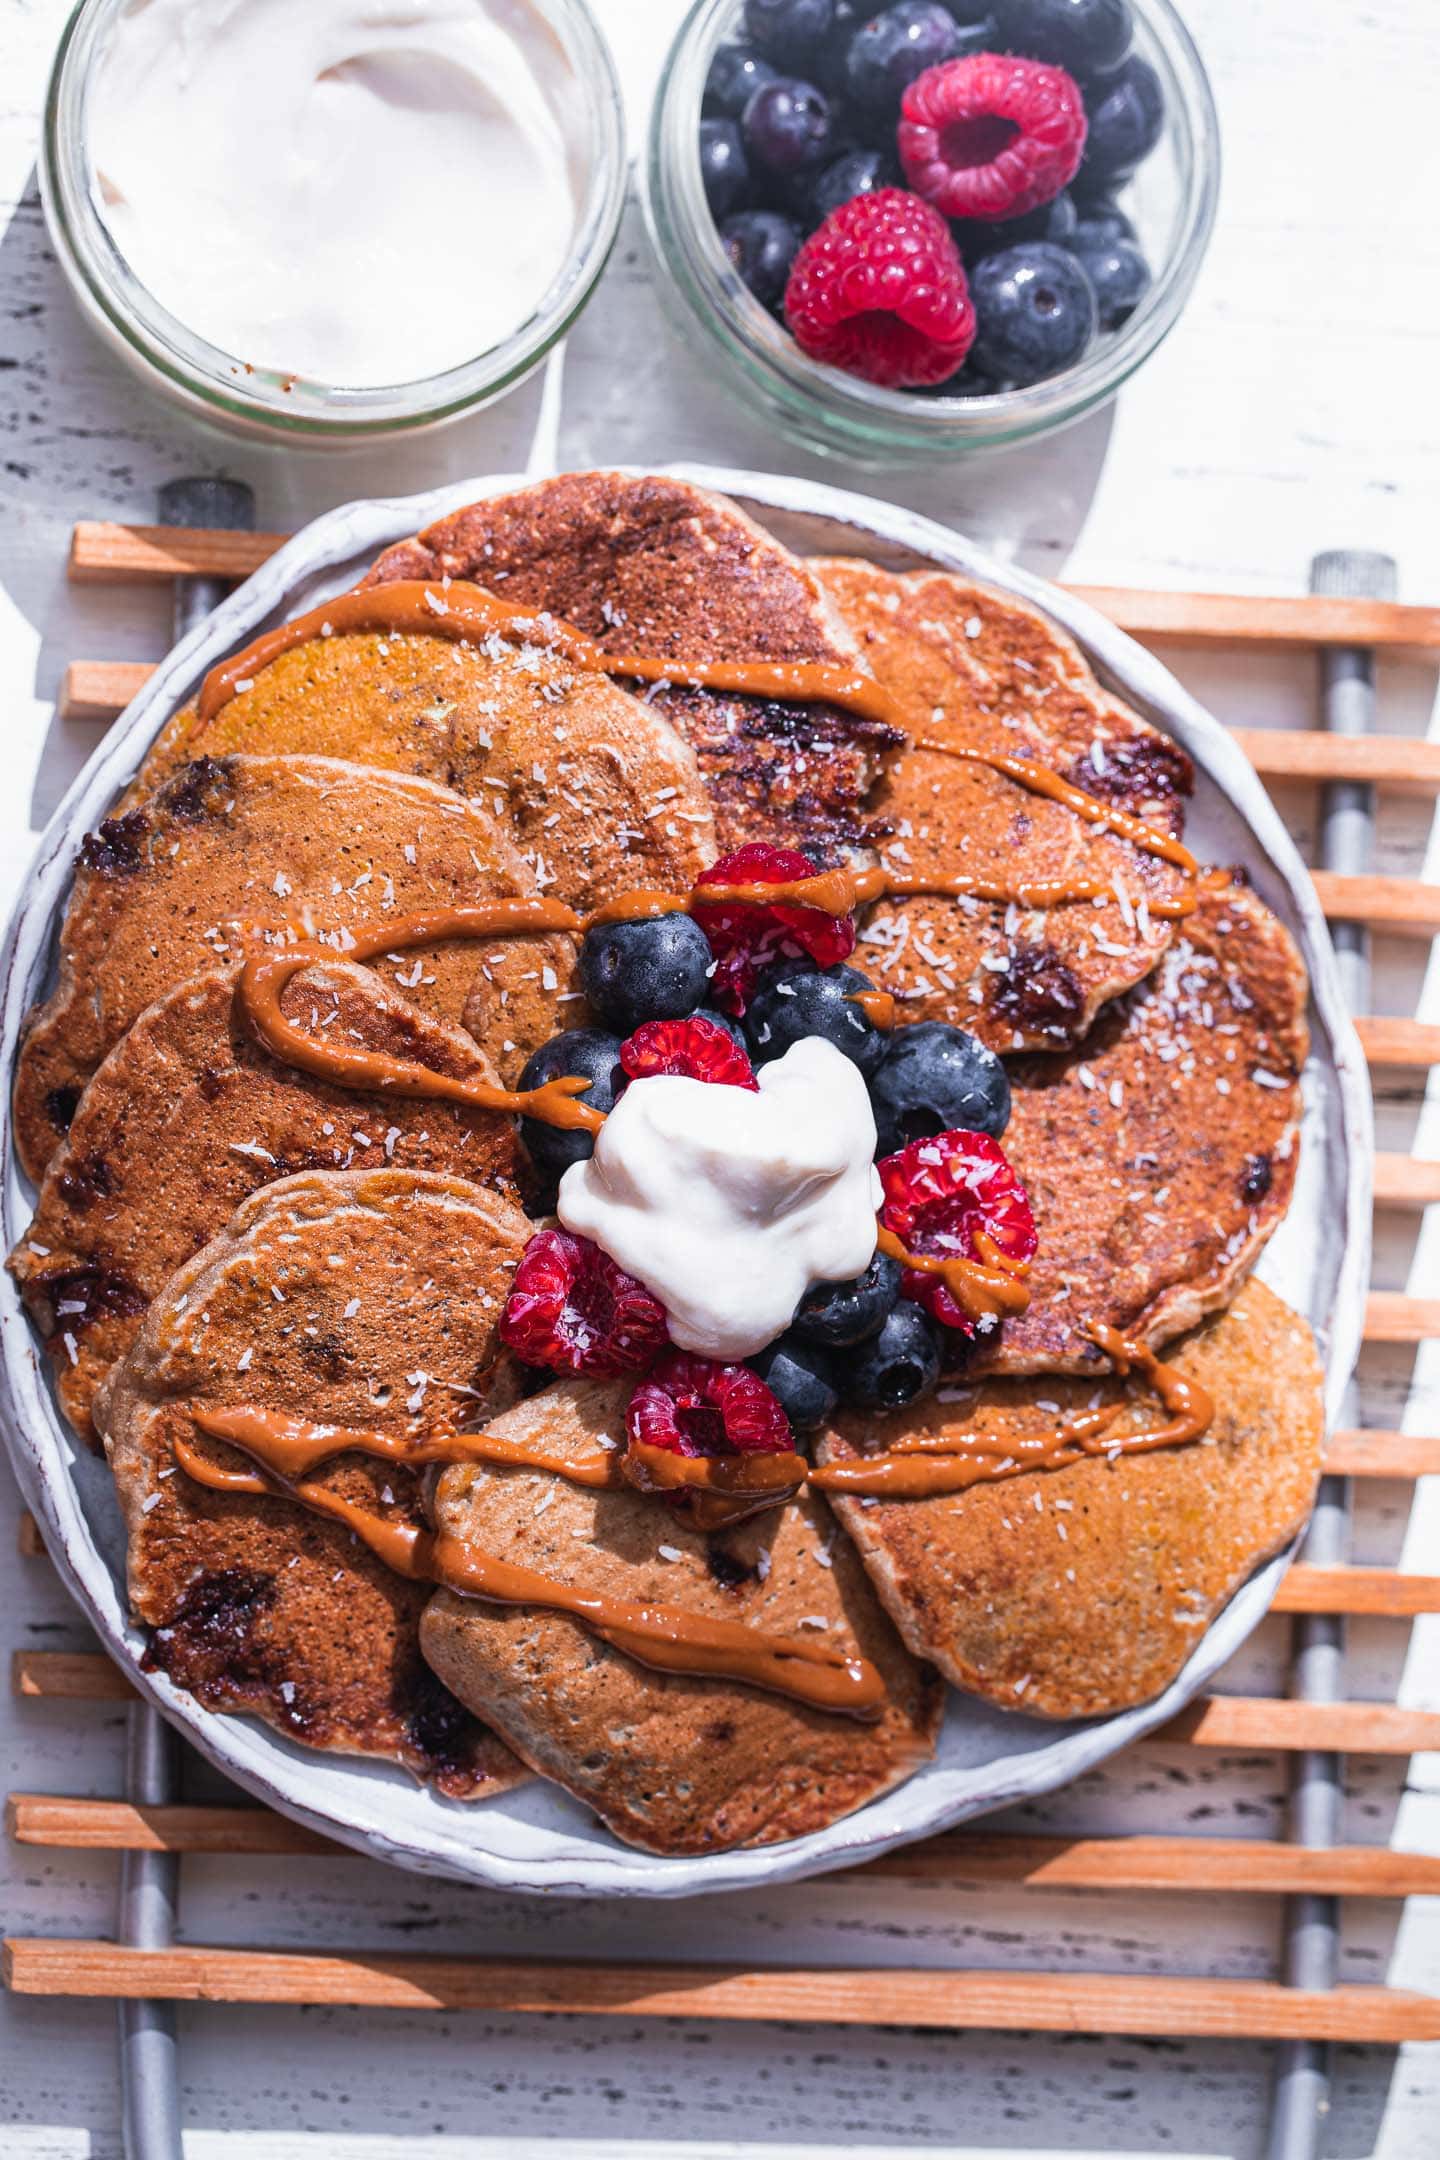 Vegan pancakes with berries and peanut butter